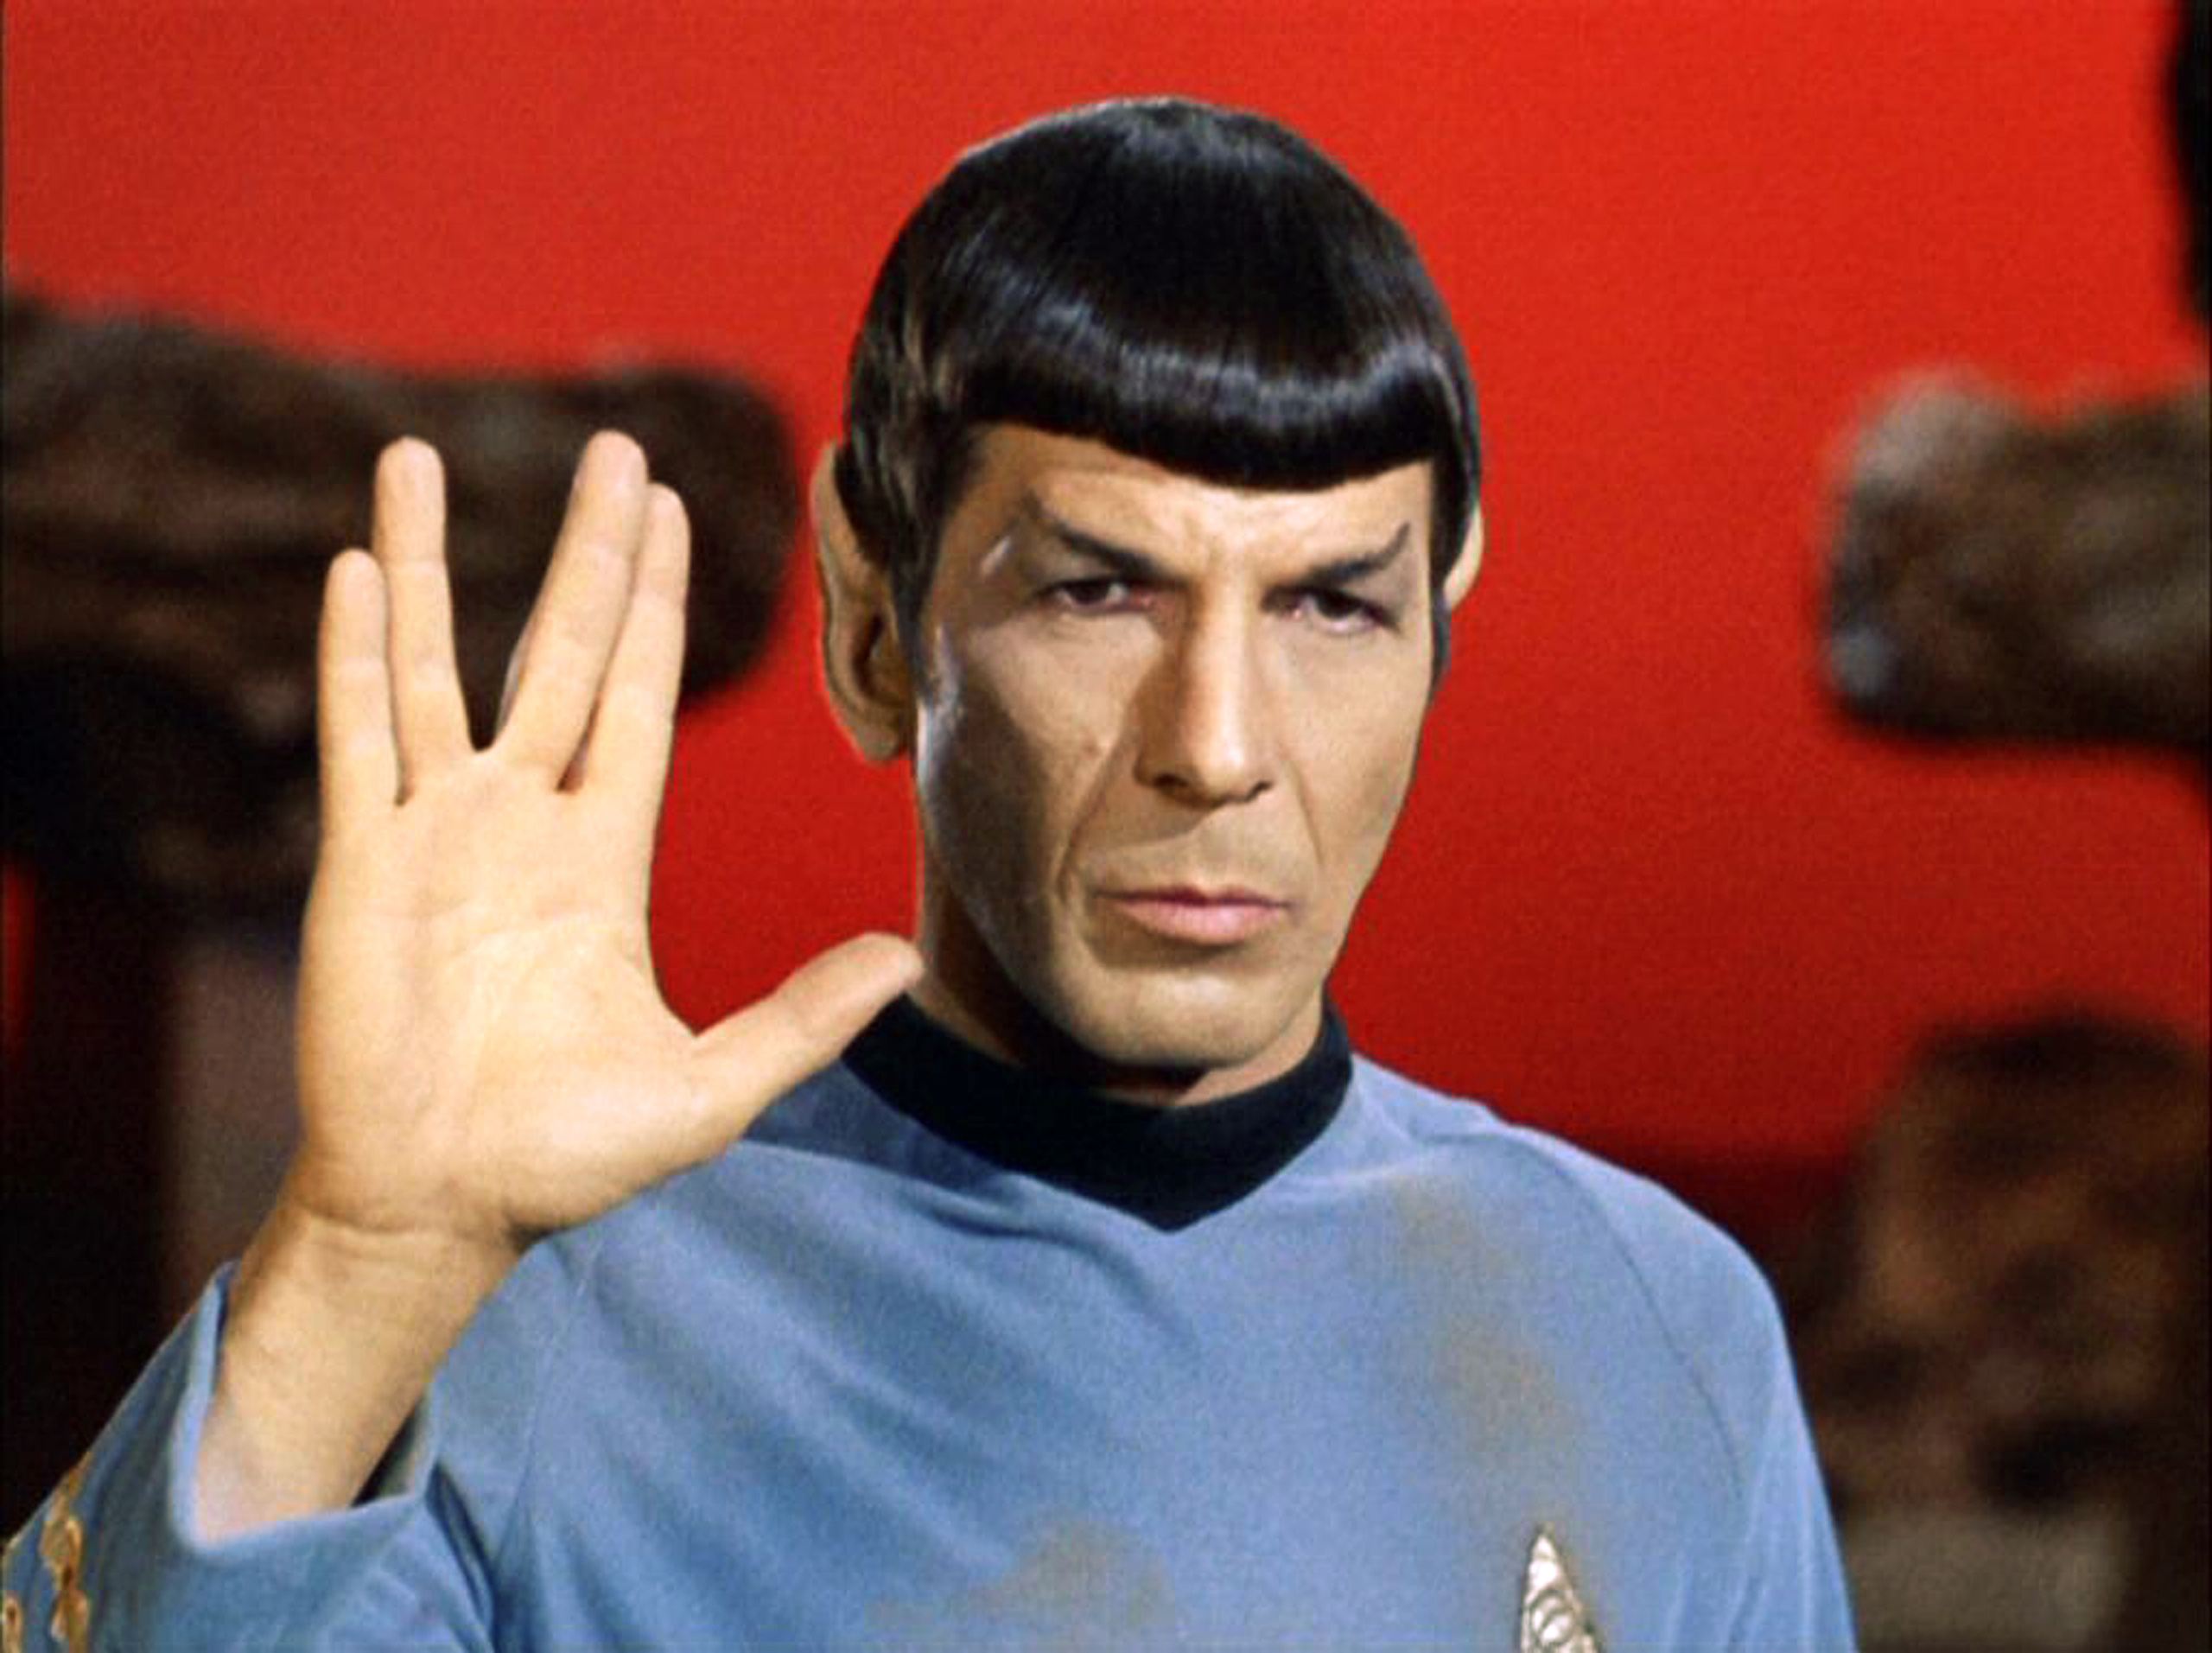 Spock shows the Vulcan salute, usually accompanied with the words, 